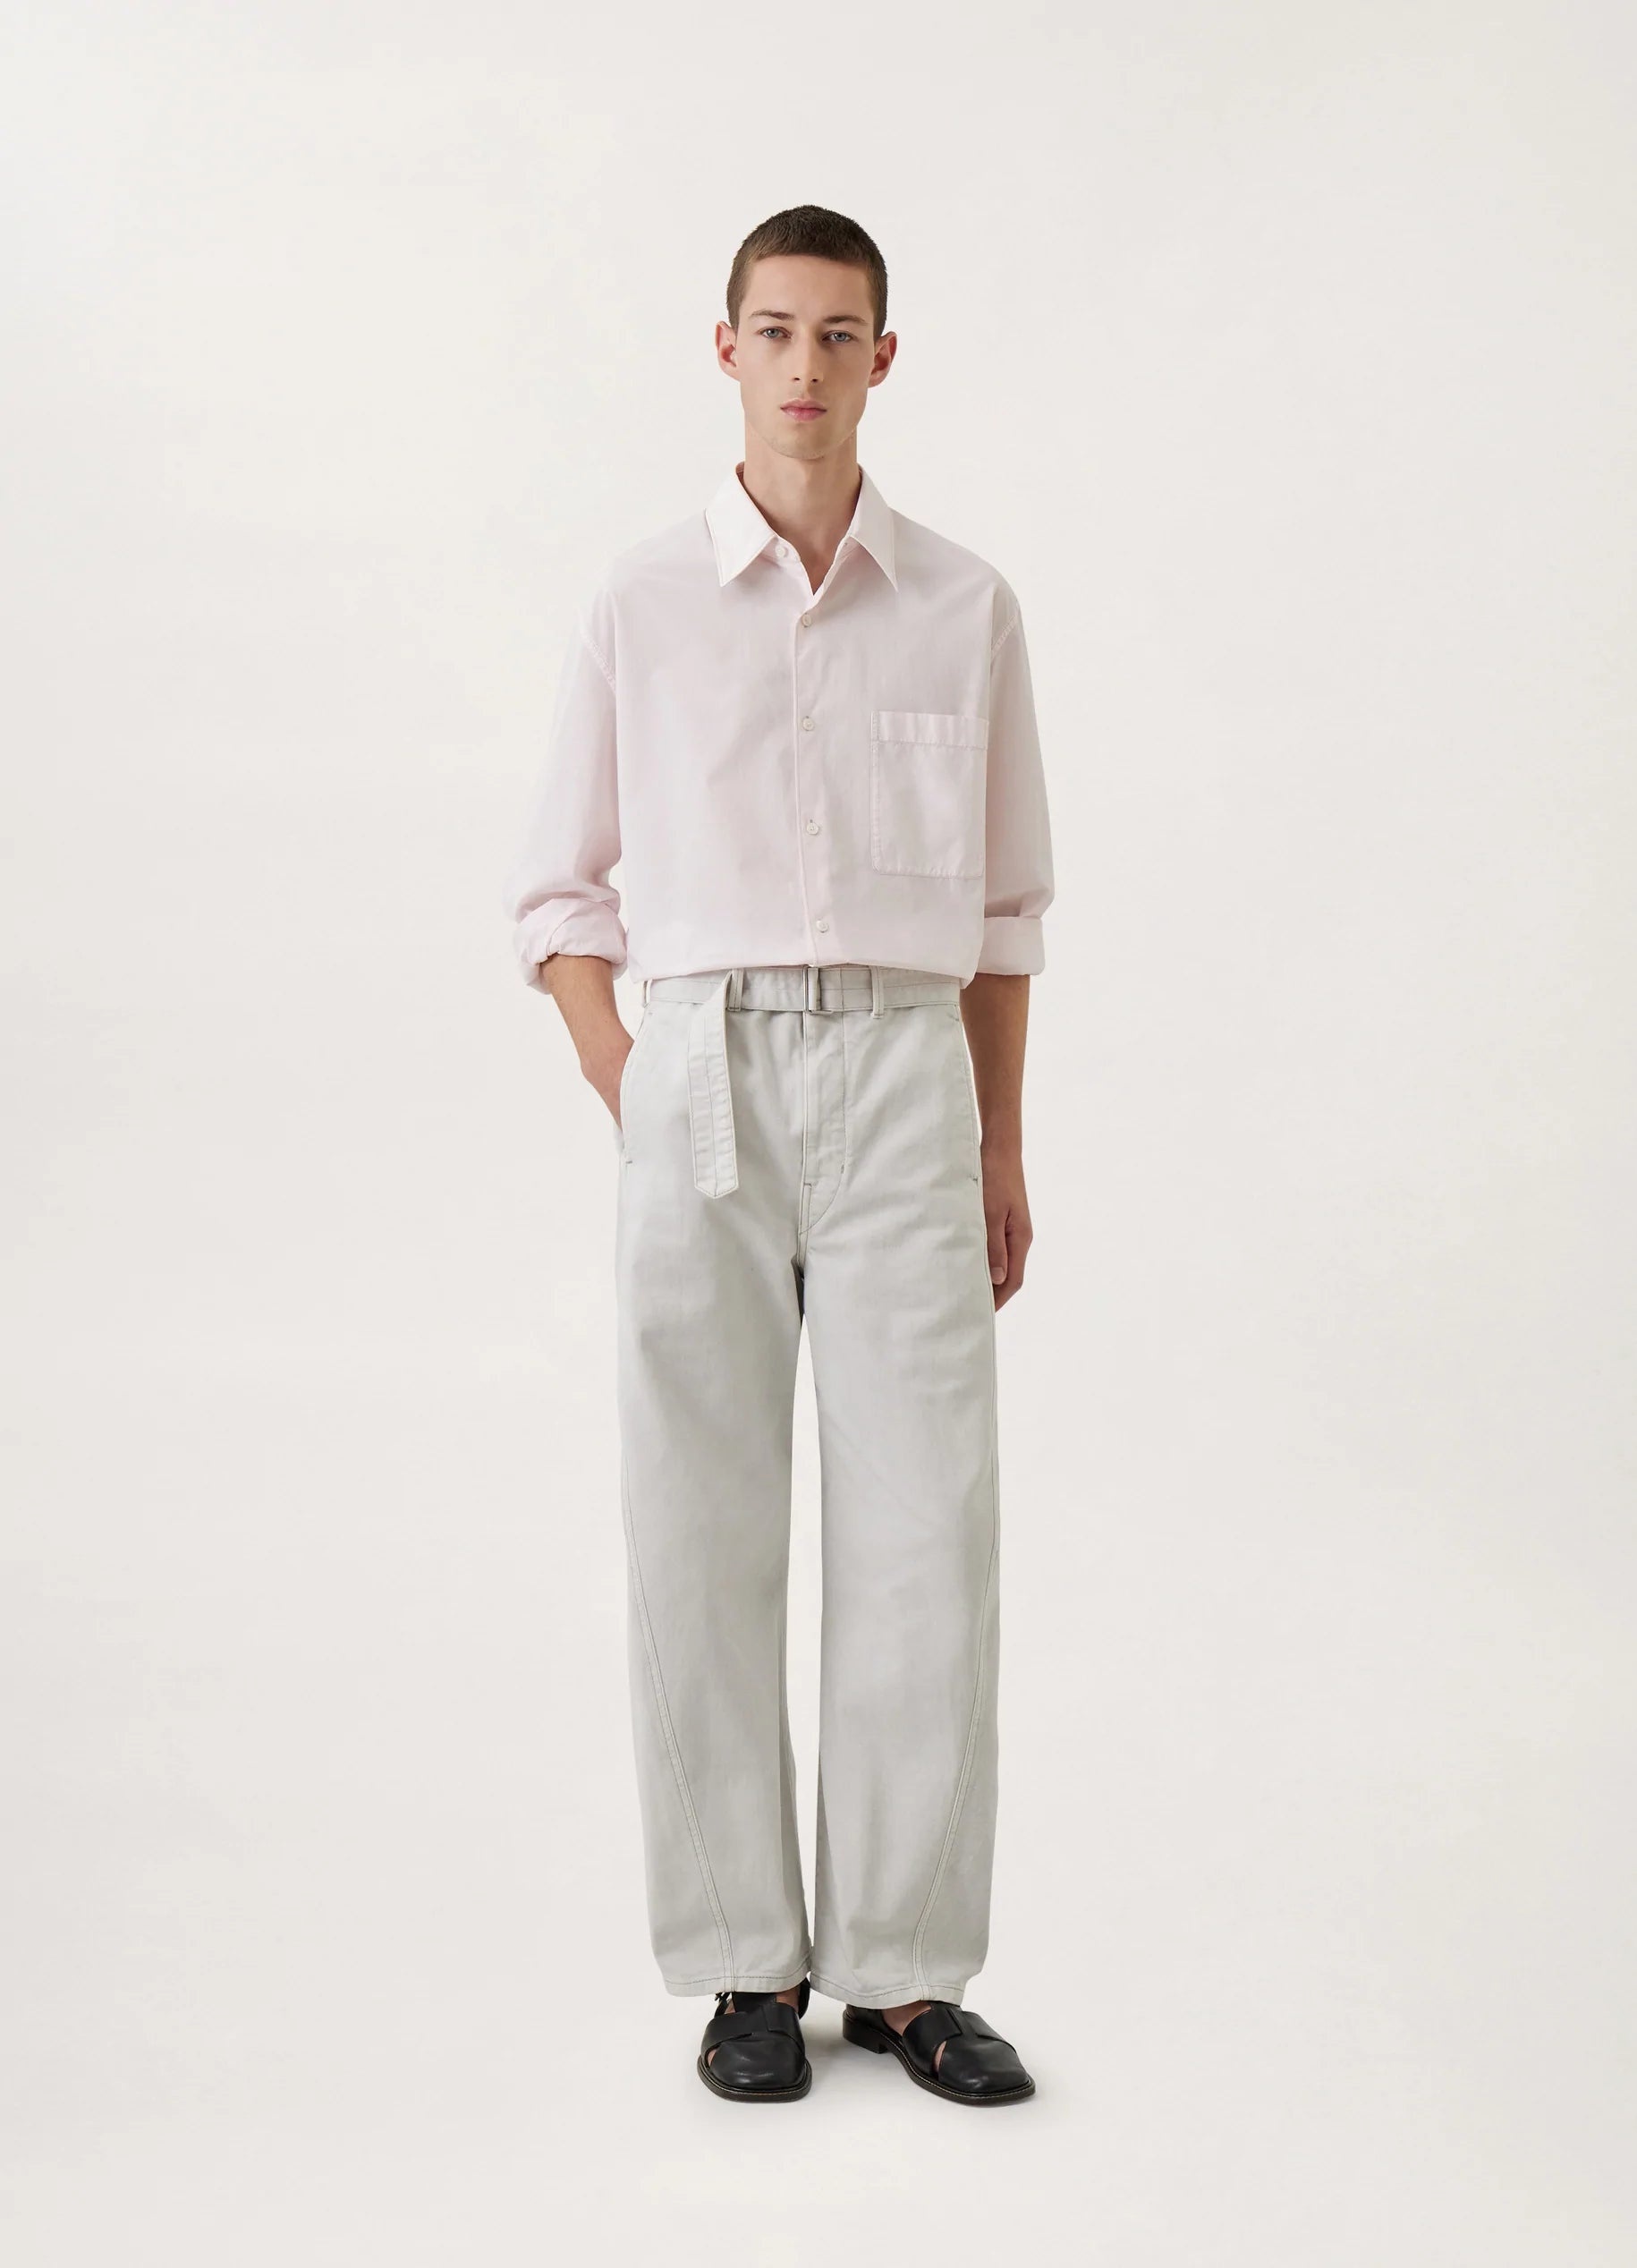 Lemaire Twisted Belted Pants デニム　ジーンズ付属品タグ替えボタン